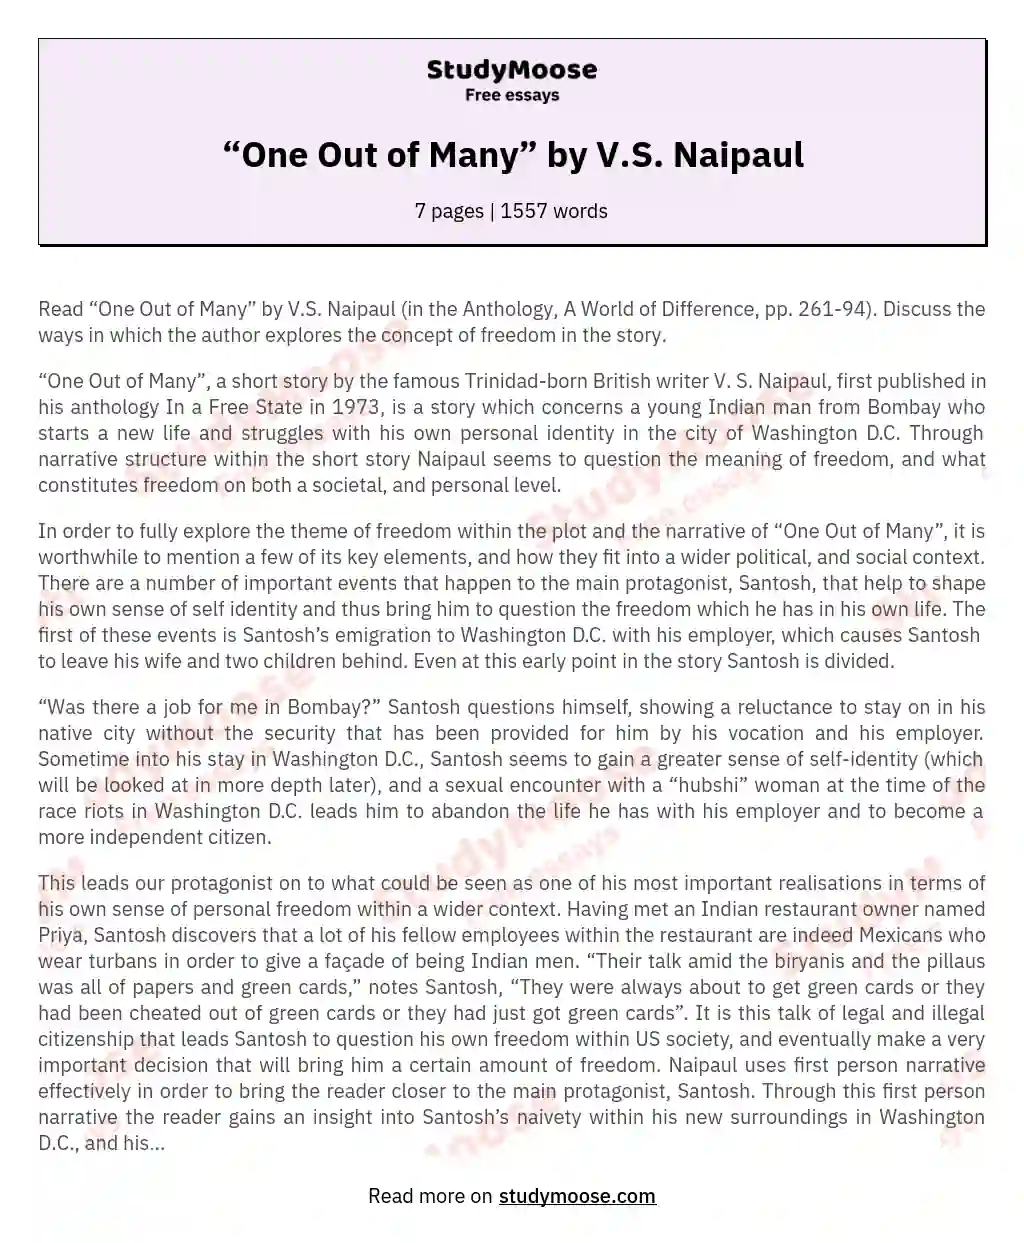 “One Out of Many” by V.S. Naipaul essay